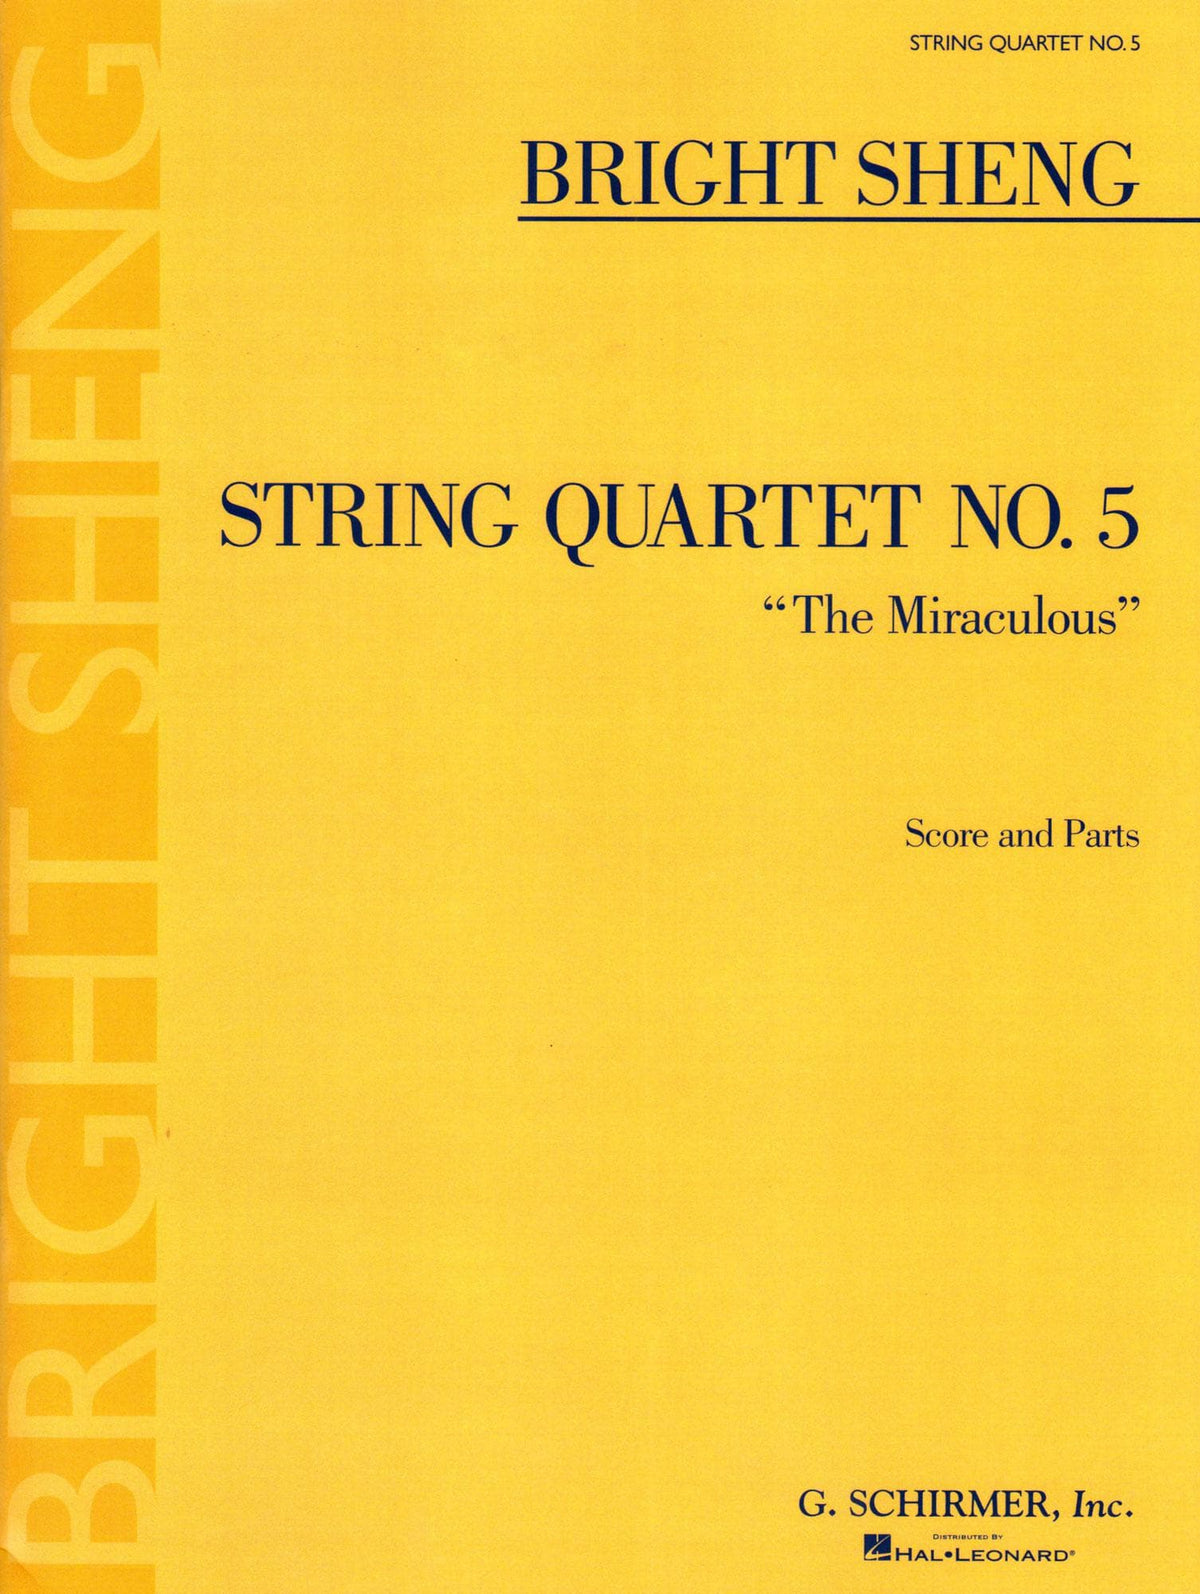 Sheng, Bright - String Quartet No. 5, "The Miraculous" - for 2 Violins, Viola, and Cello - G Schirmer Edition